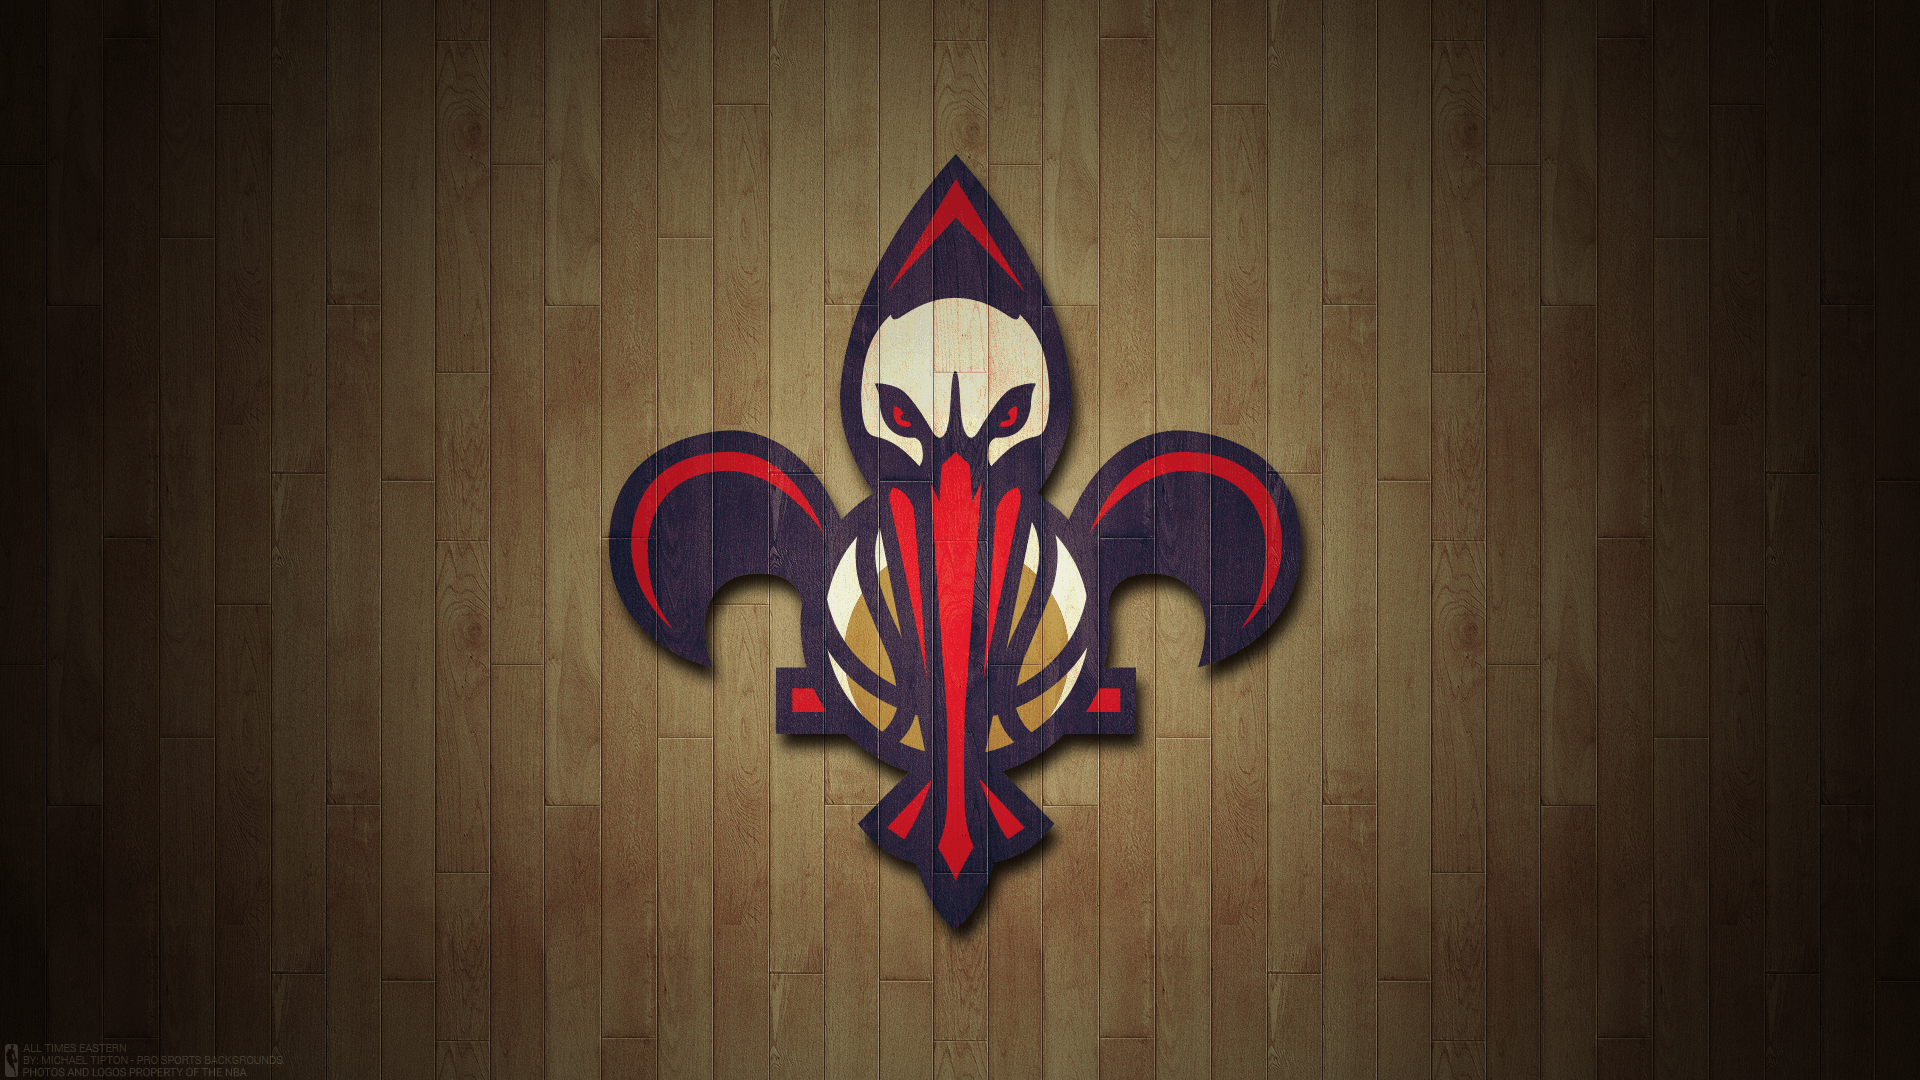 New Orleans Pelicans Wallpaper. iPhone. Android